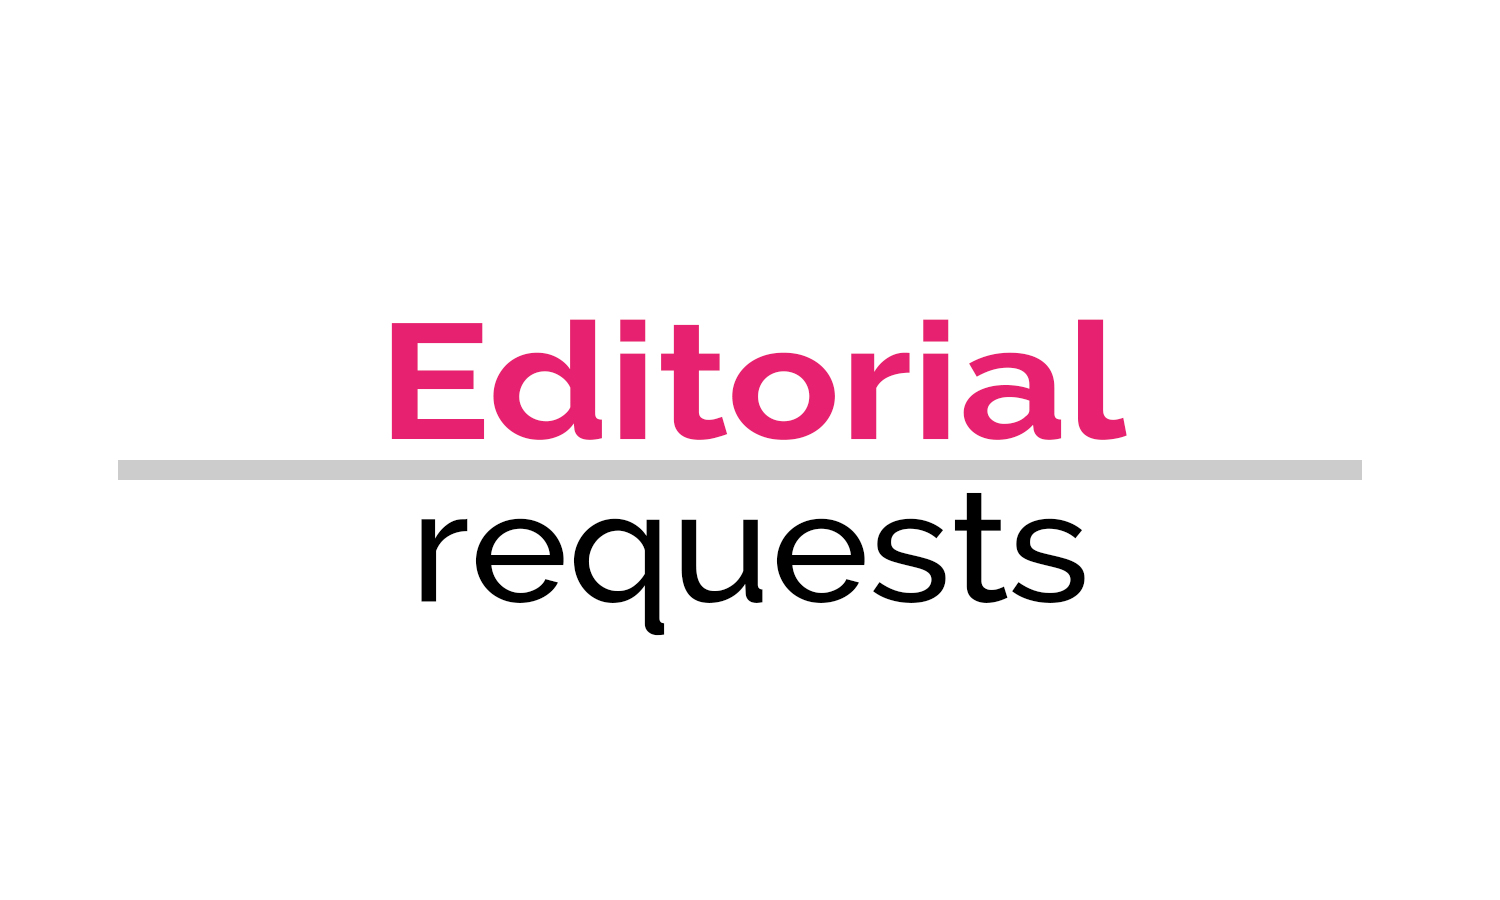 Lifestyle e-zine seeks botox experts to comment for article (2.8k Instagram followers)